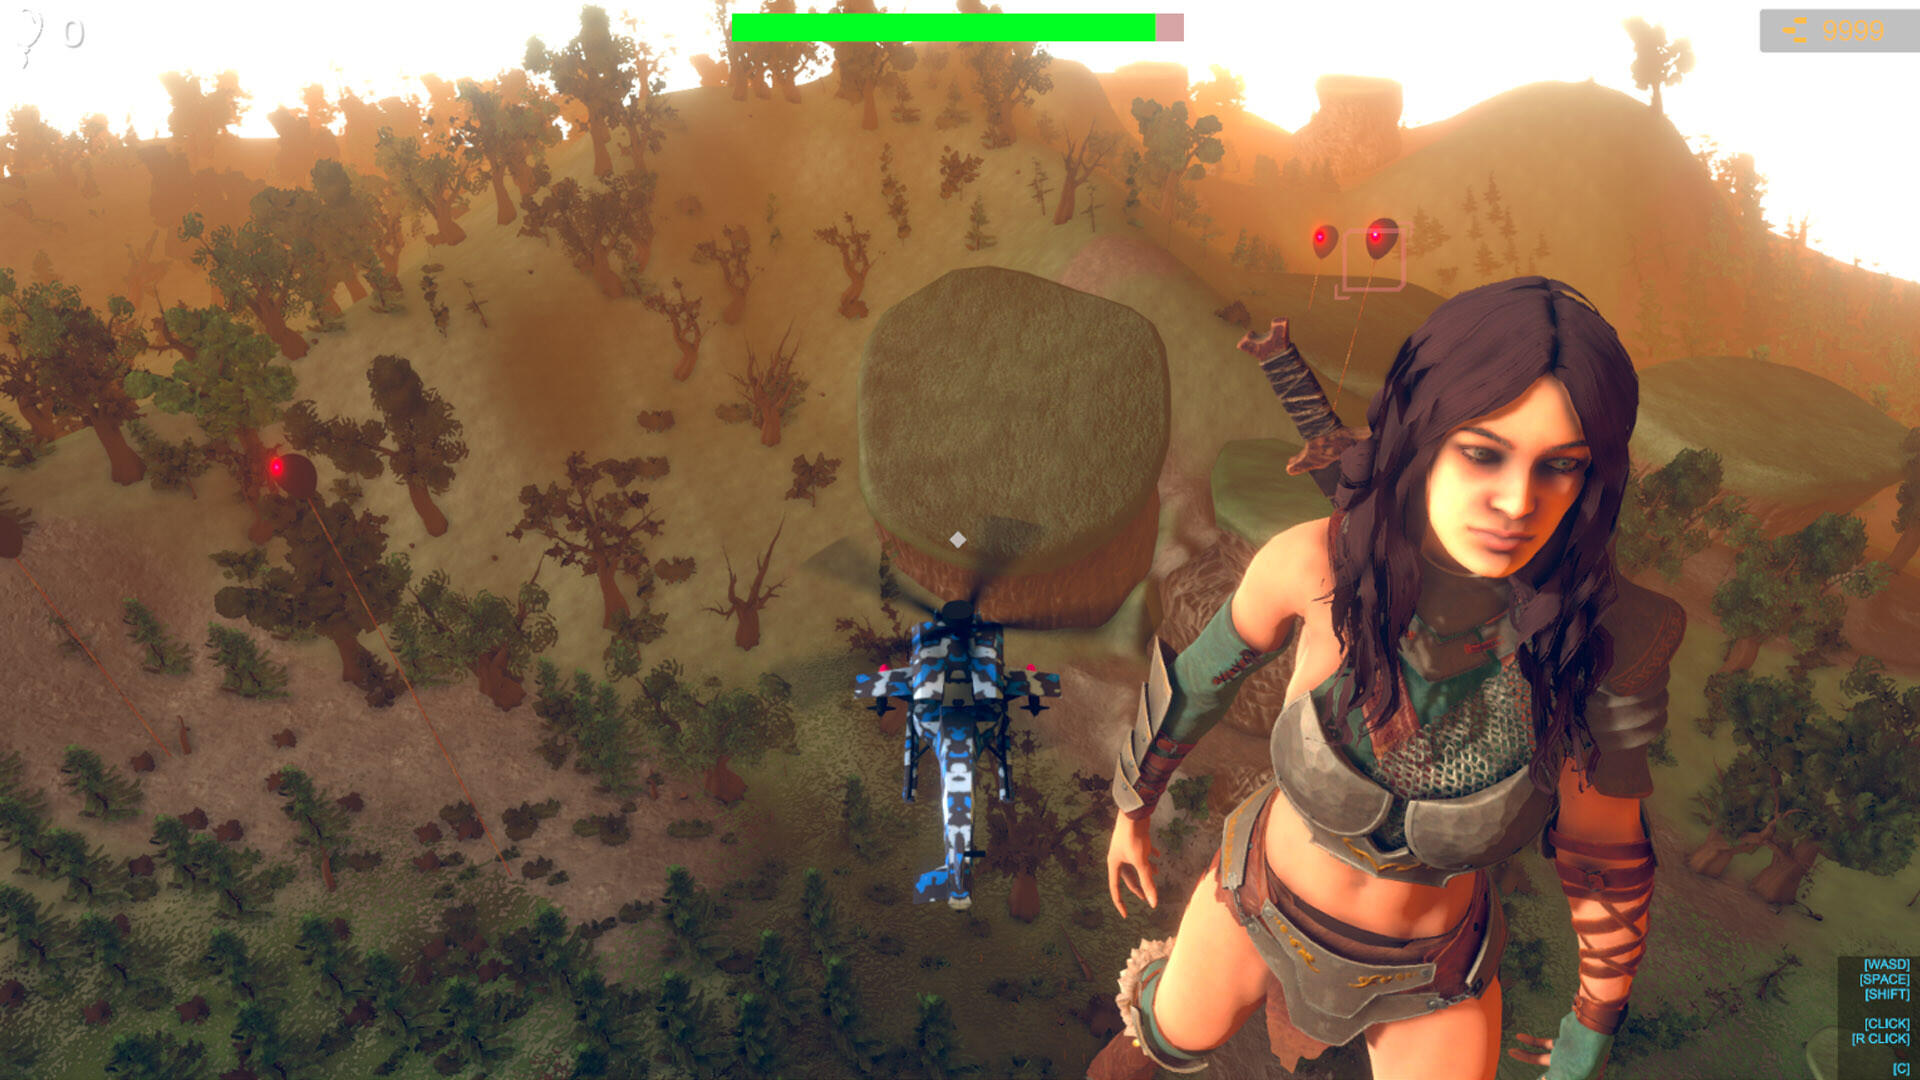 Save Giant Girl from monsters 2 screenshot game